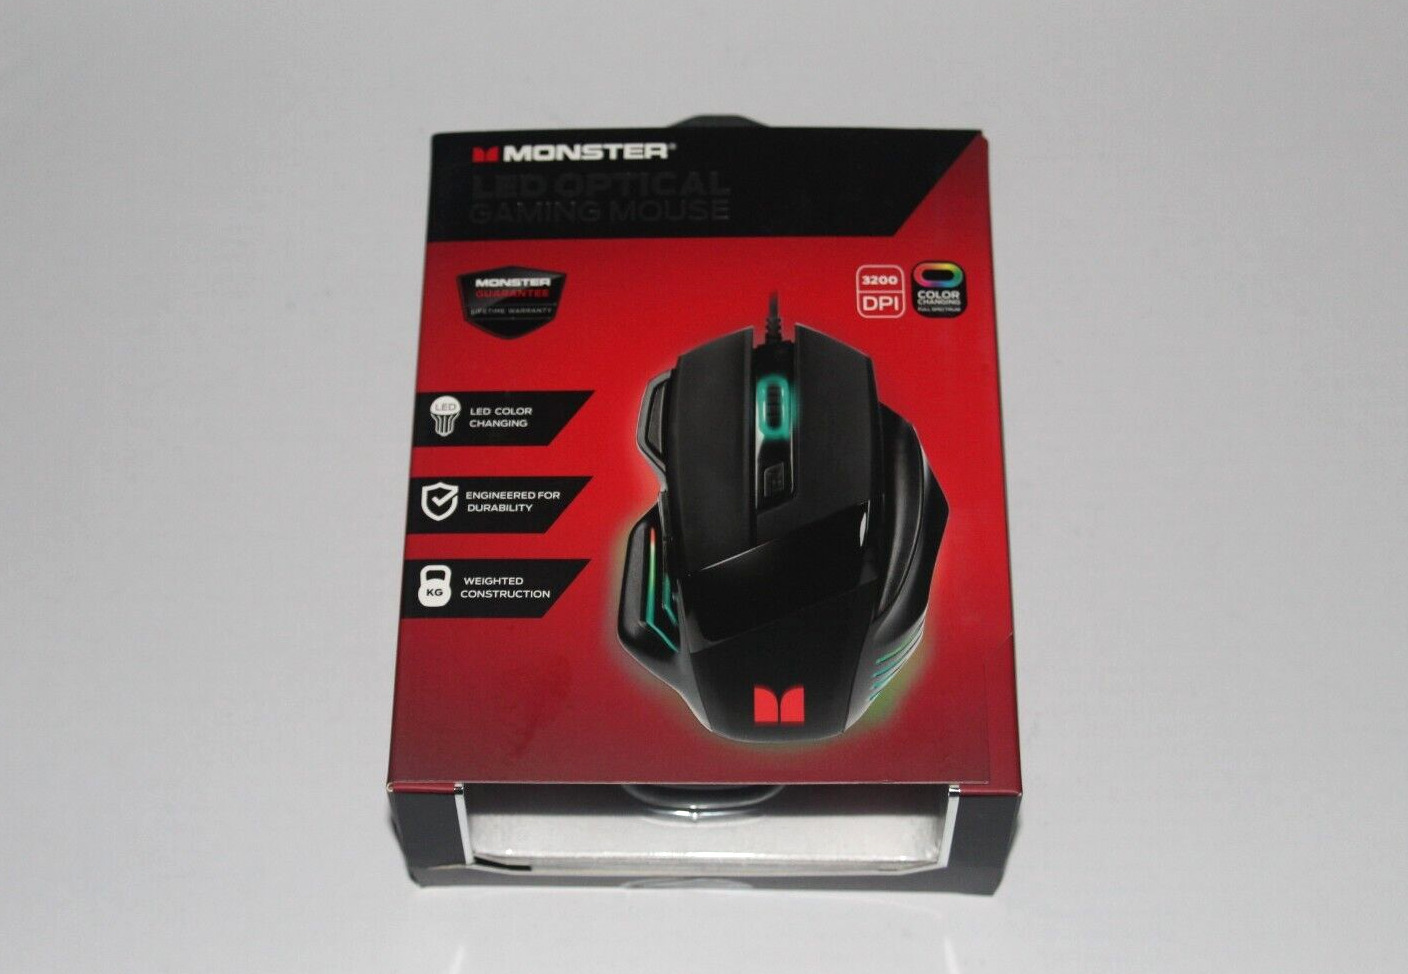 Monster Color Changing LED Optical Video Gaming Mouse